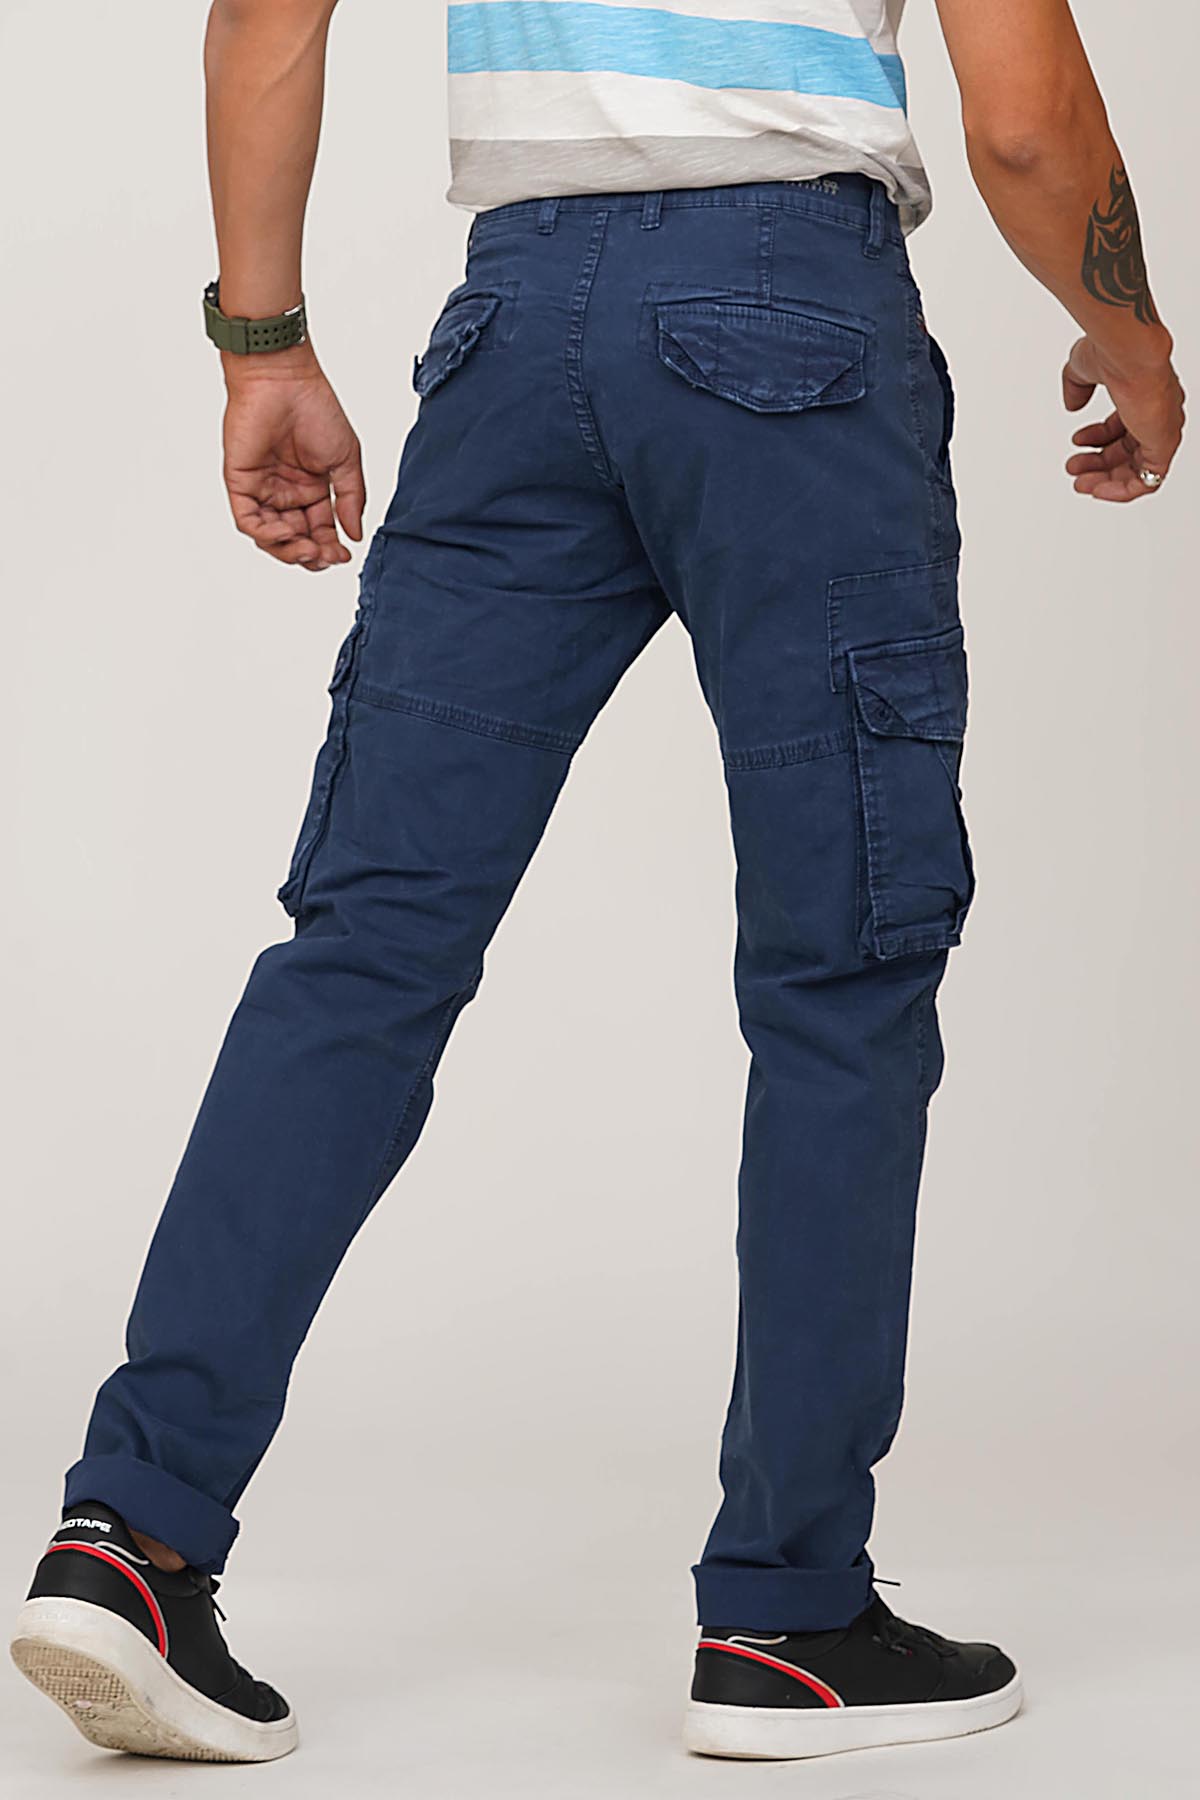 Men Classic Relax Fitted Cargo Pants with Multi Pockets Washed Cotton Soft  Material Male Pants  China Pants and Cargo Pants price  MadeinChinacom